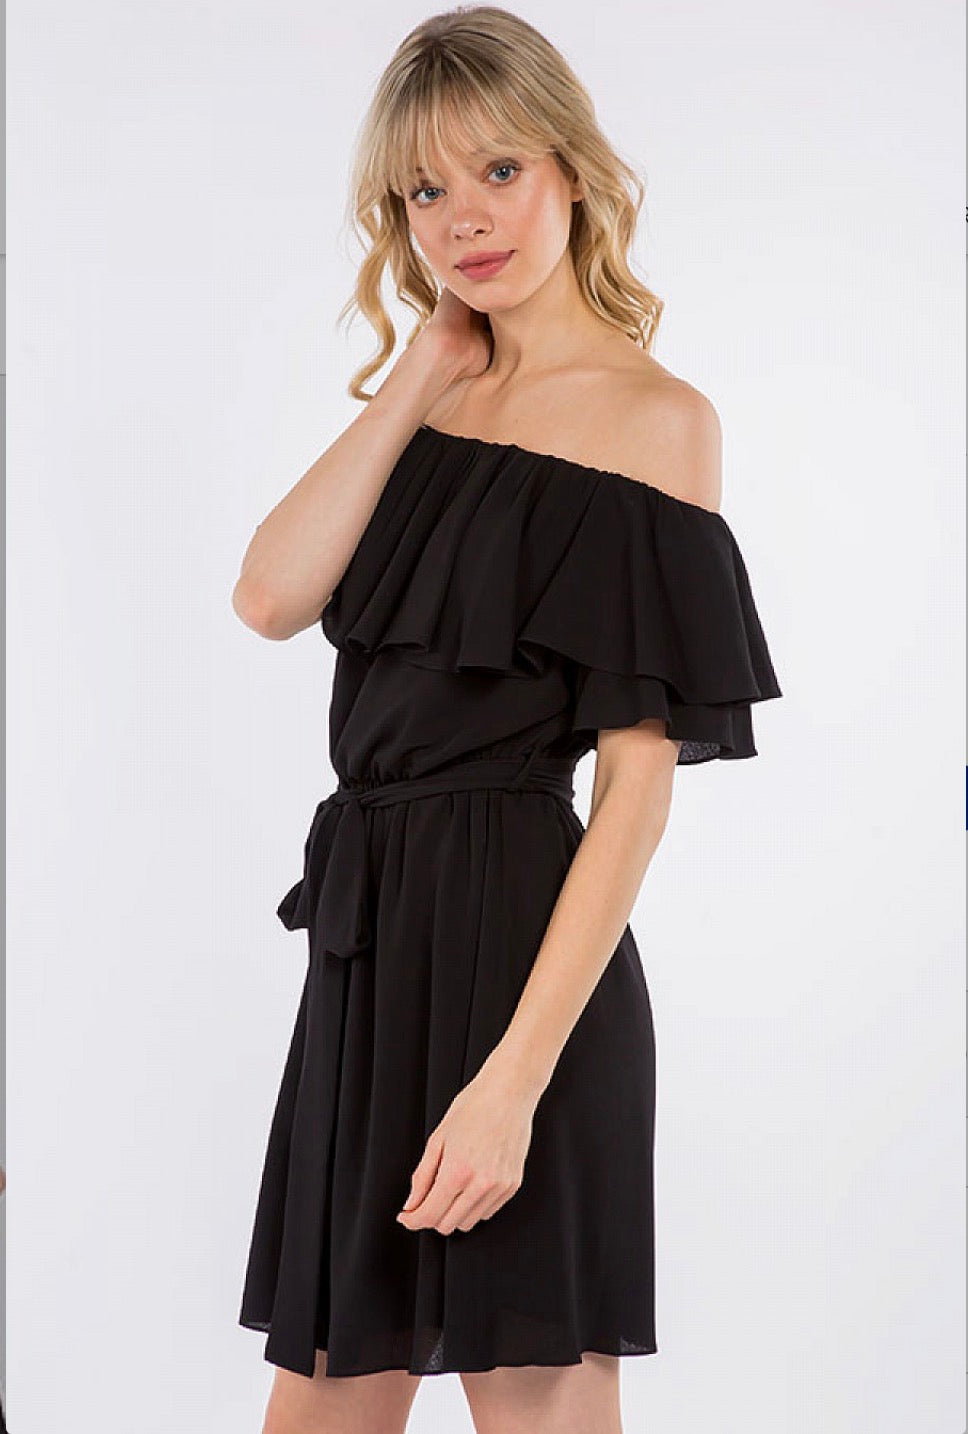 A woman in a Spin USA Off Shoulder Ruffle Dress posing for a picture.